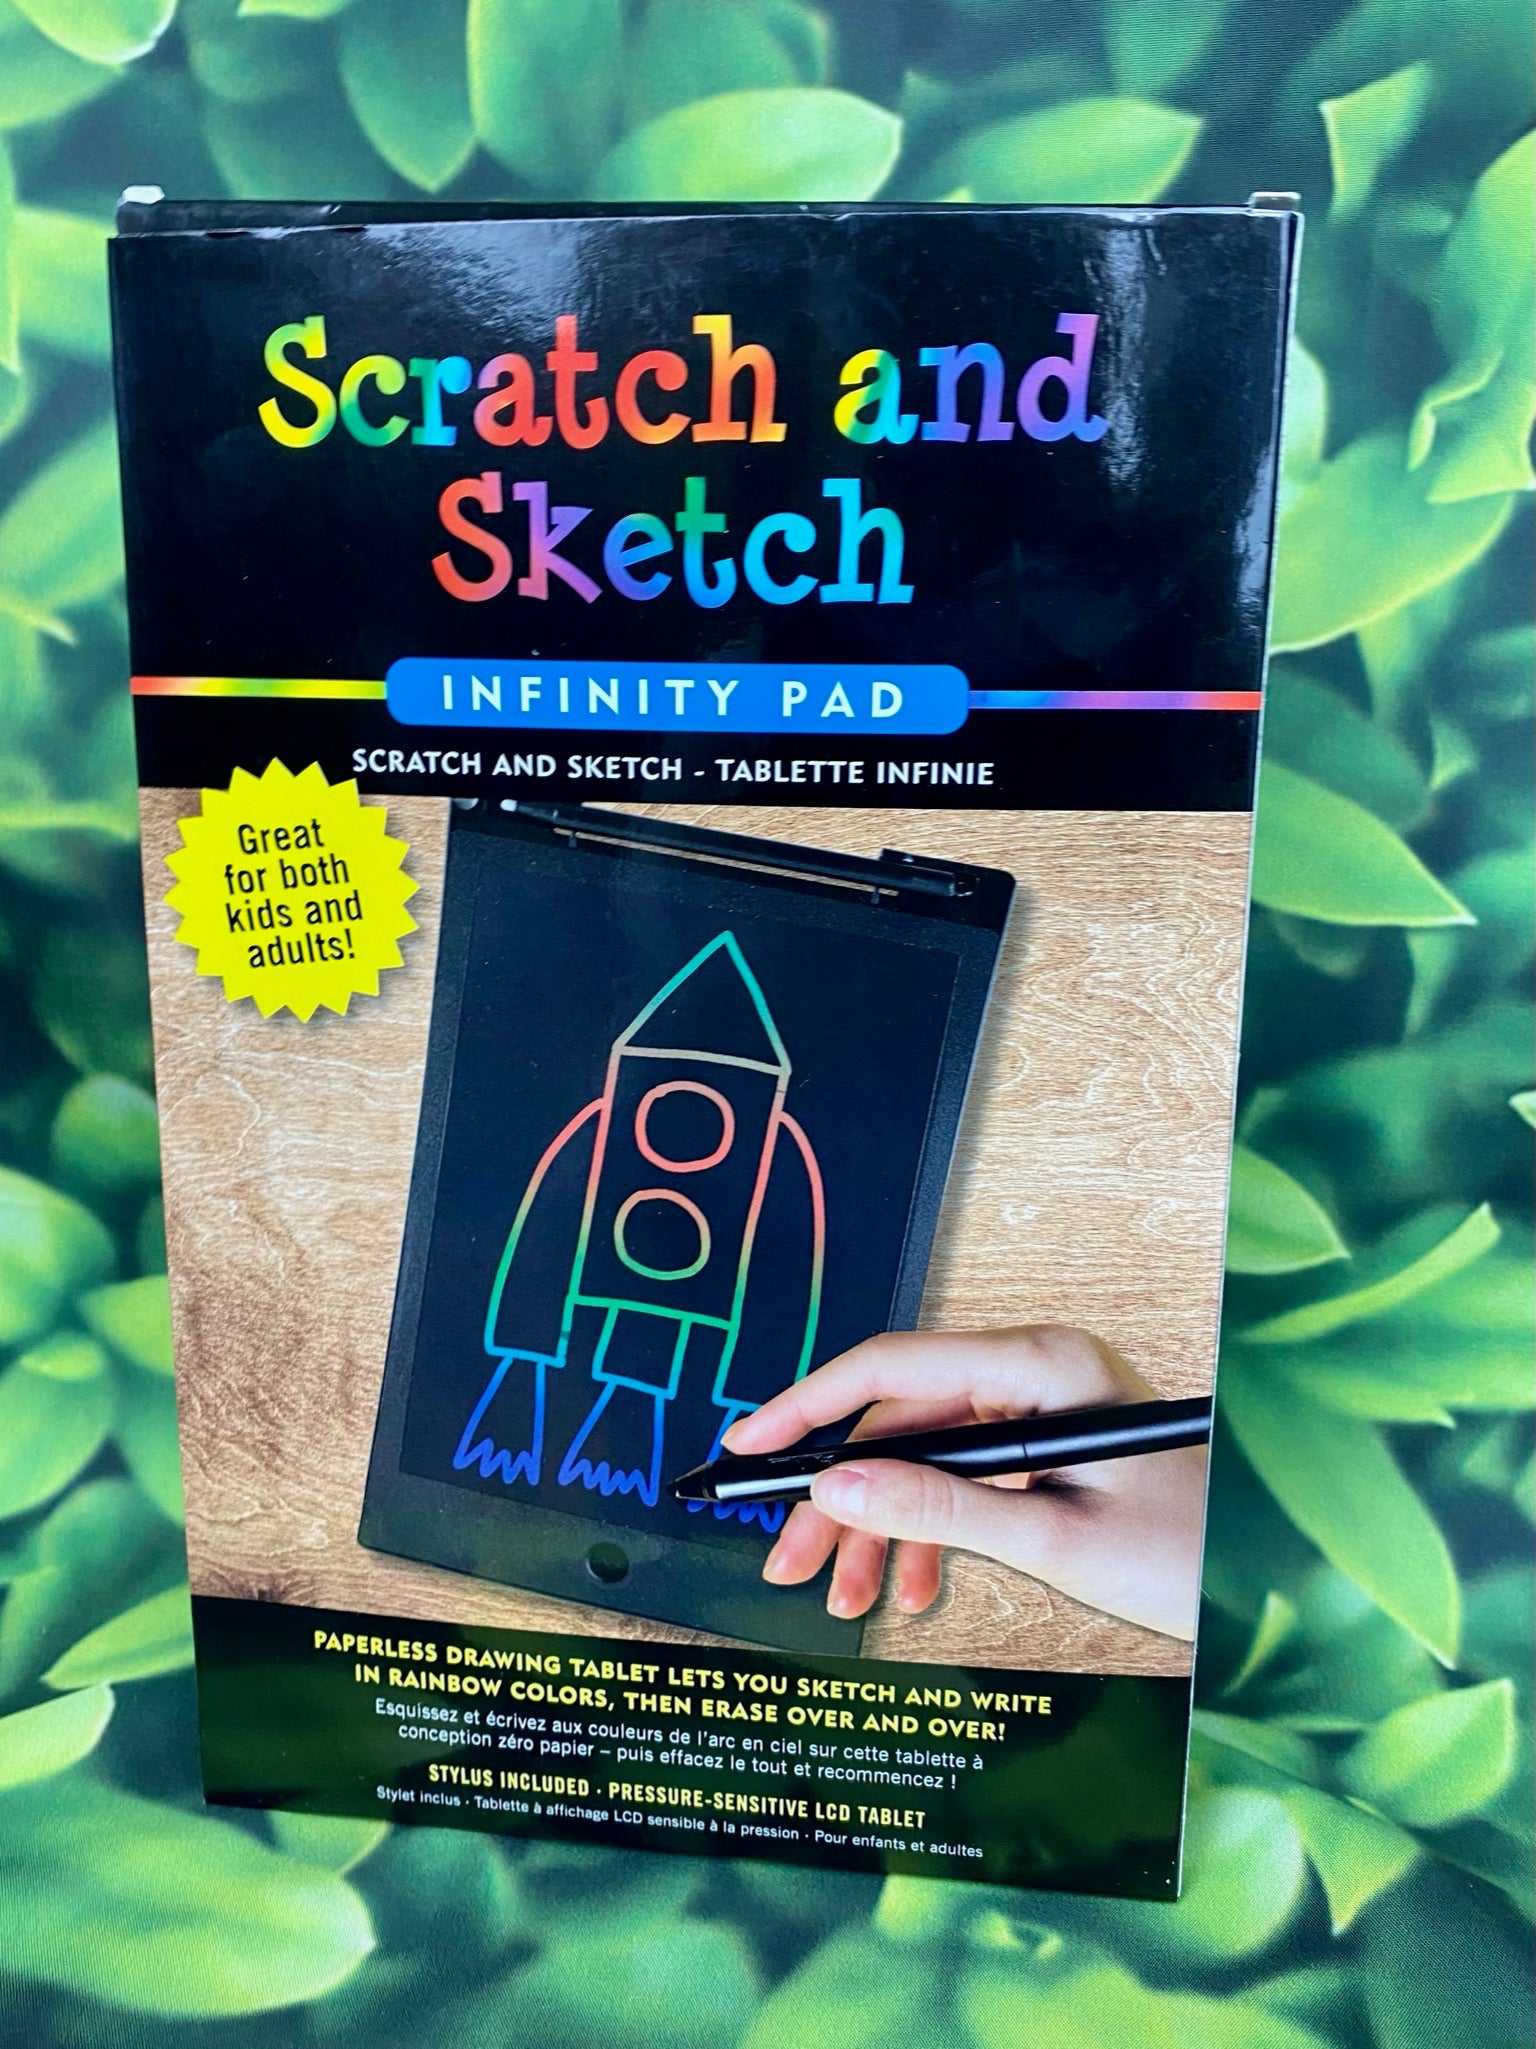 Scratch and Sketch Infinity Pad